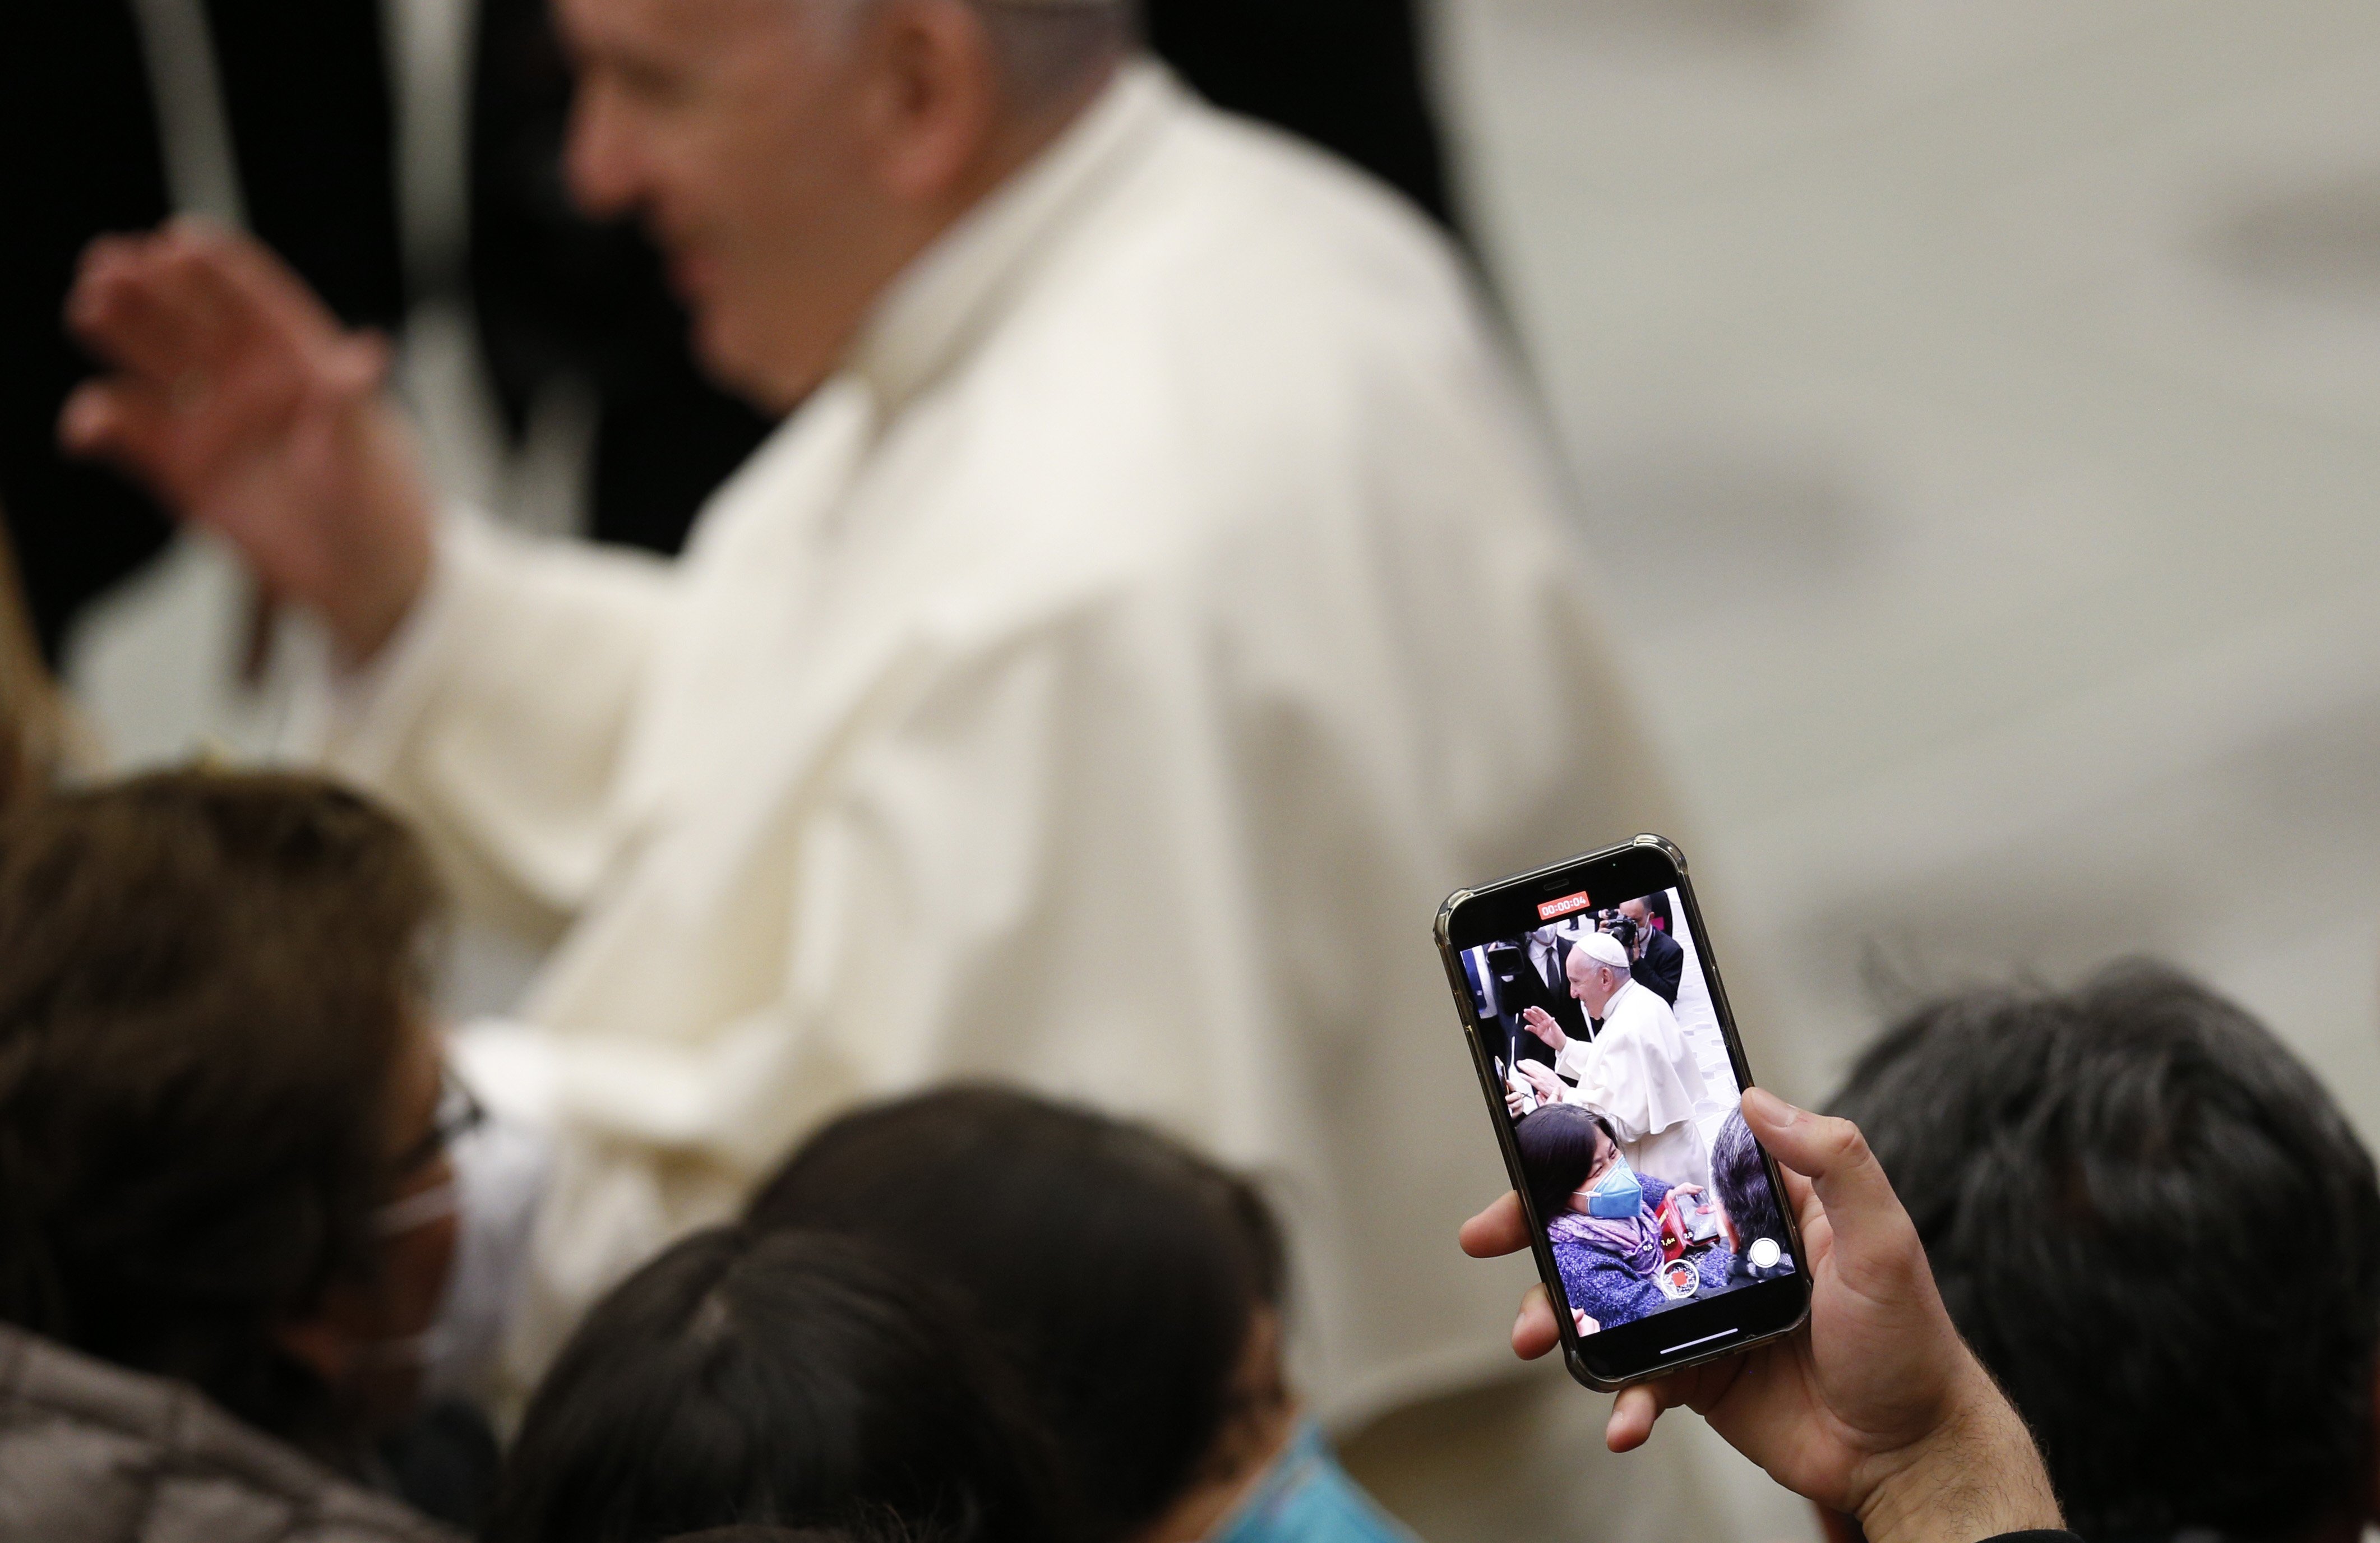 Pope Francis is pictured on a smart phone as he greets people during his general audience in the Paul VI hall at the Vatican Jan. 19, 2022. (CNS photo/Paul Haring)